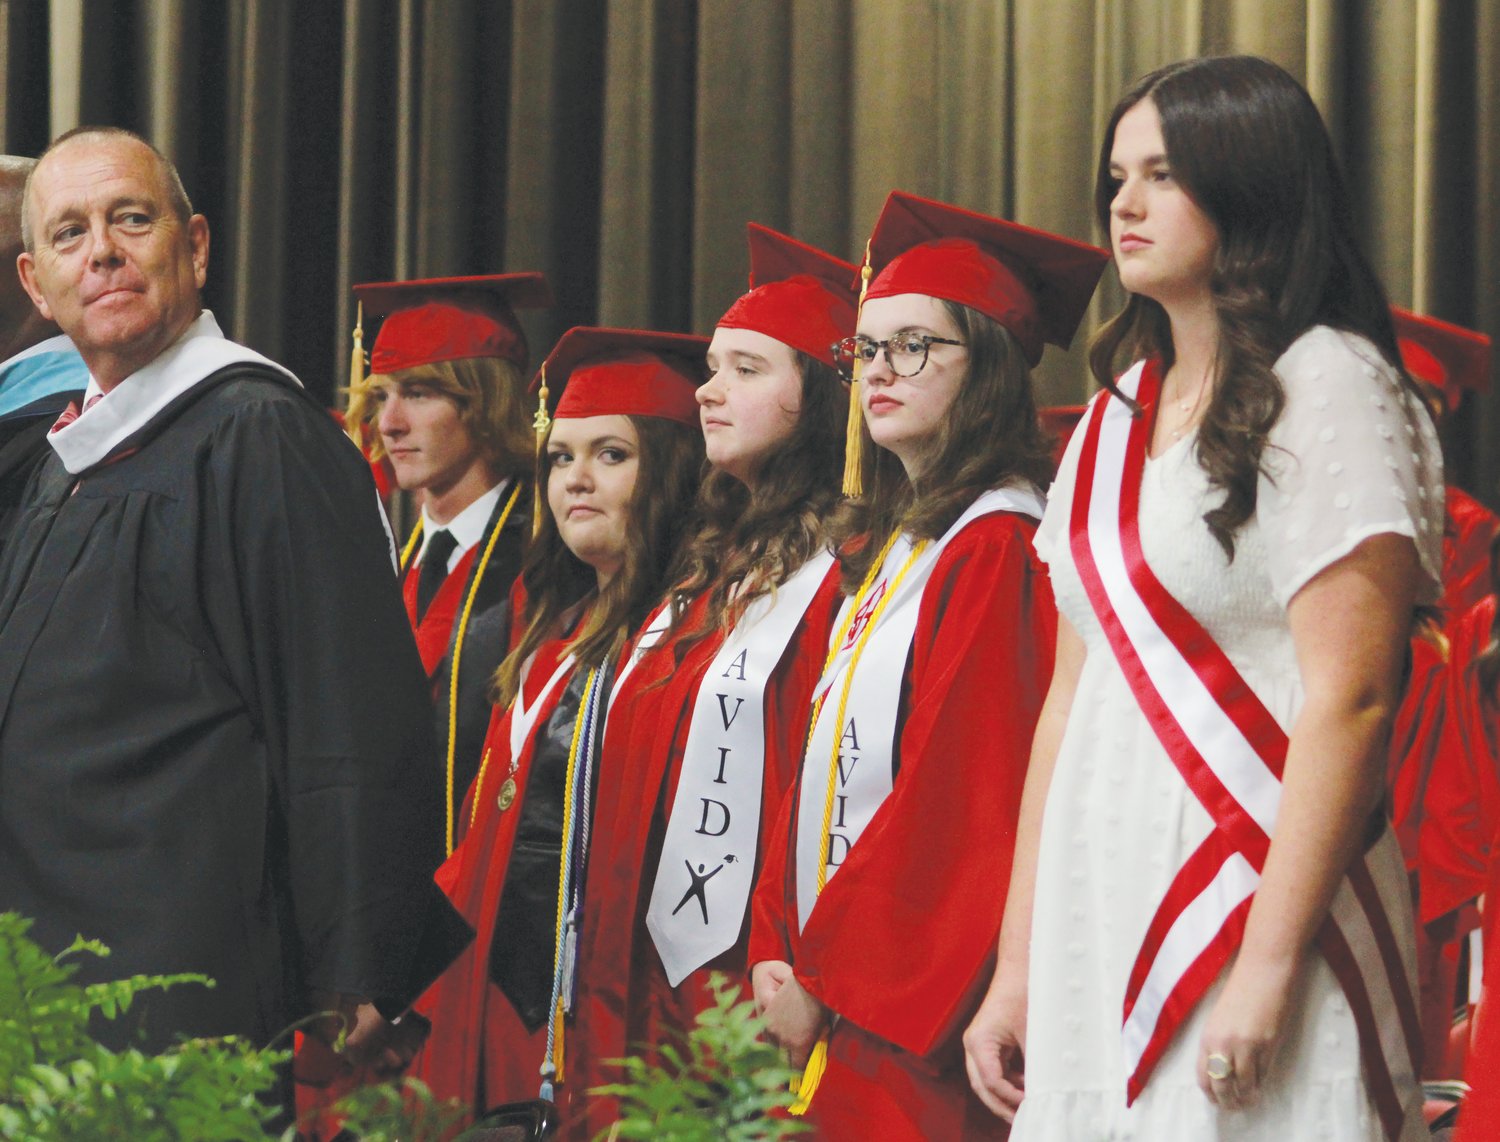 The student speakers of the Chatham Central High School class of 2022 are escorted to their seats before their graduation on Friday at the Dennis A. Wicker Civic Center in Sanford.